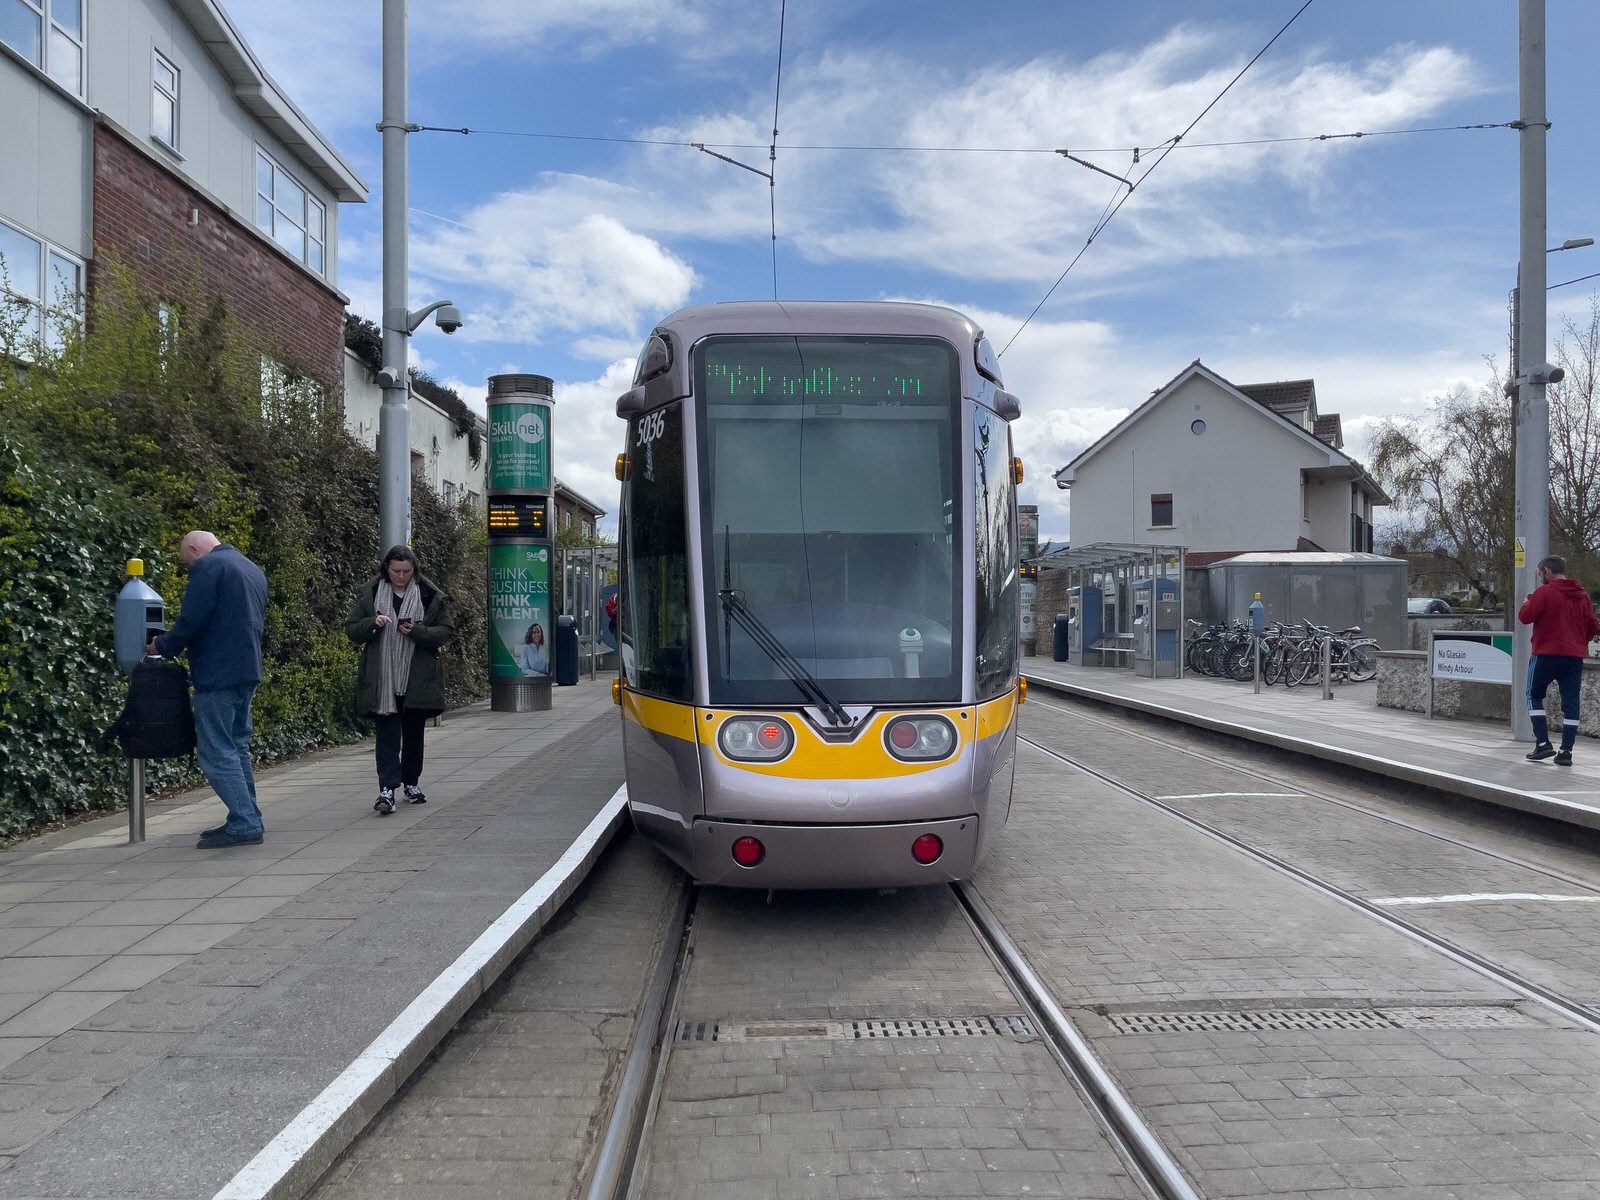 THE LUAS TRAM STOP AT WINDY ARBOUR AND THE IMMEDIATE AREA 026